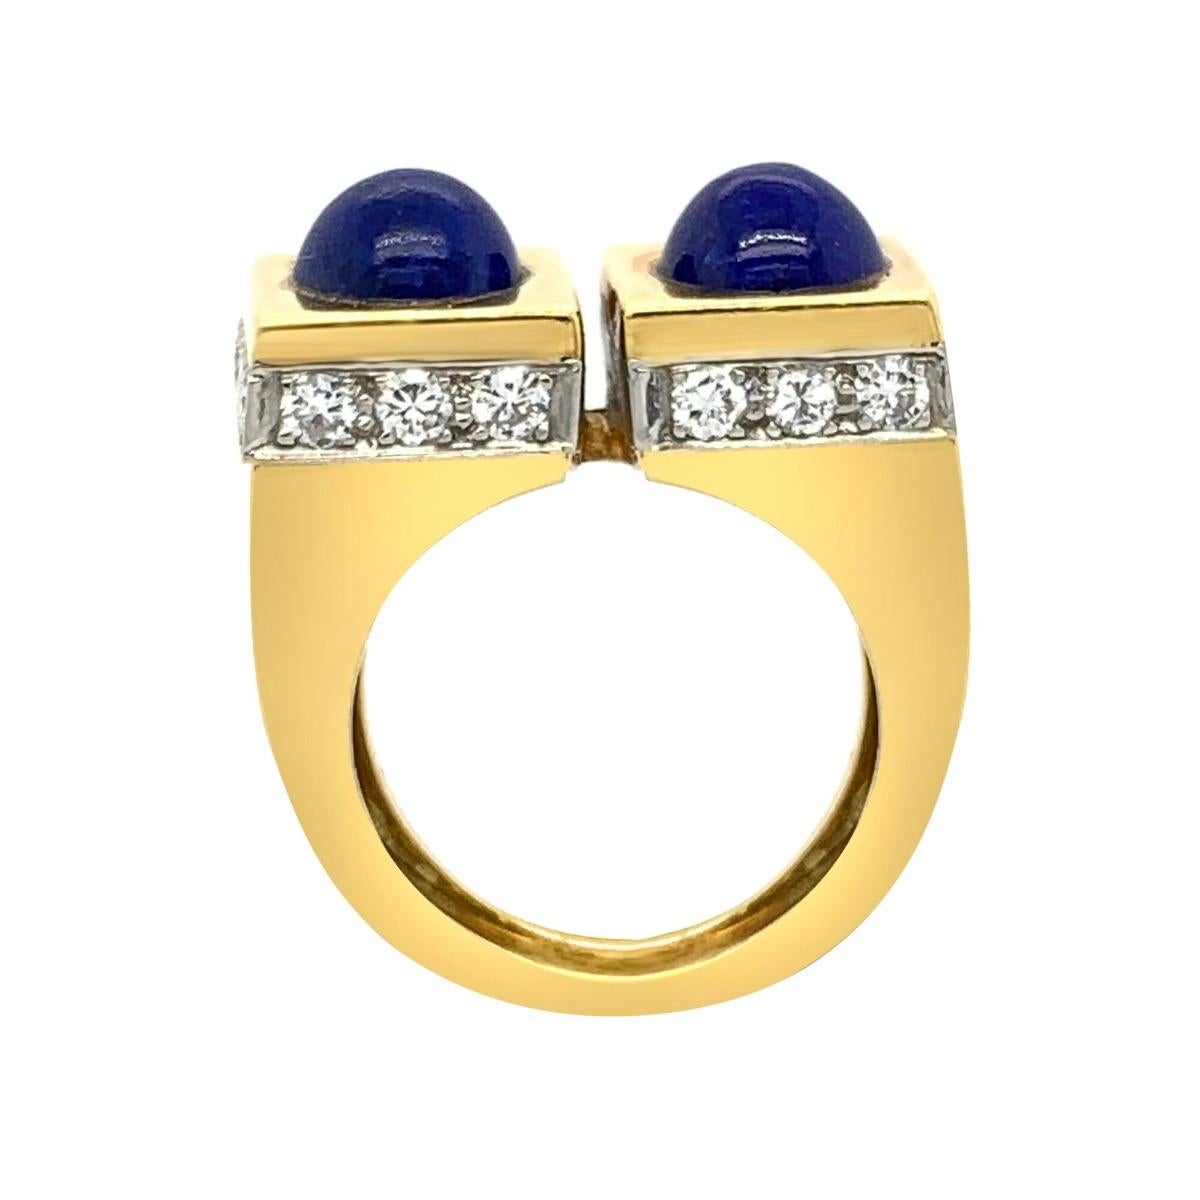 Metal: Yellow Gold
Condition: Excellent
Ring Size: 6.25
Year of Manufacture: Circa 1940s
Gemstone: Diamond, Lapis Lazuli
Diamond Weight: 1CT
Total Item Weight: 32 grams
568